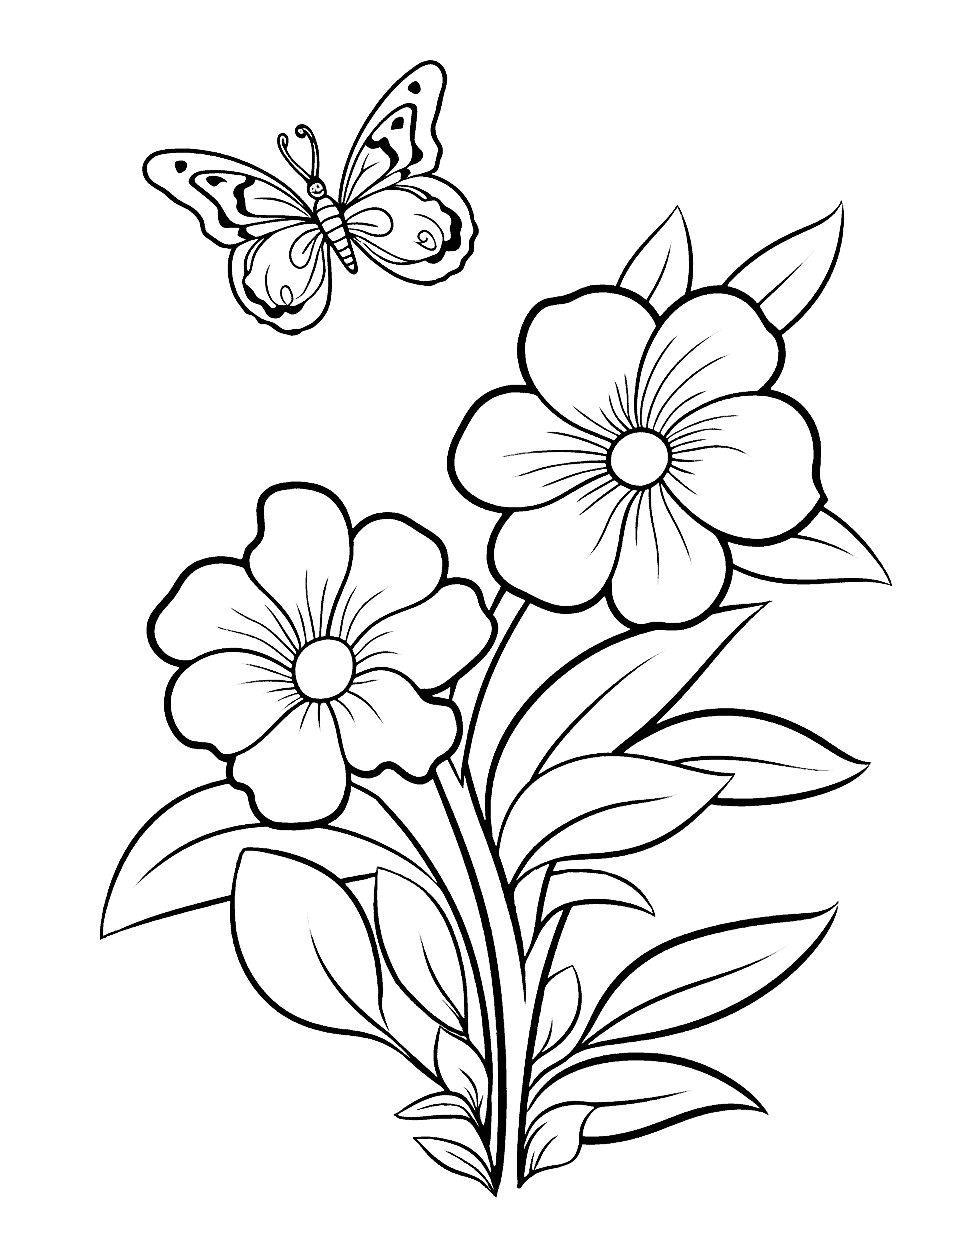 Tropical Flower and Butterfly Scene Coloring Page - A cute tropical scene with flowers and butterflies.